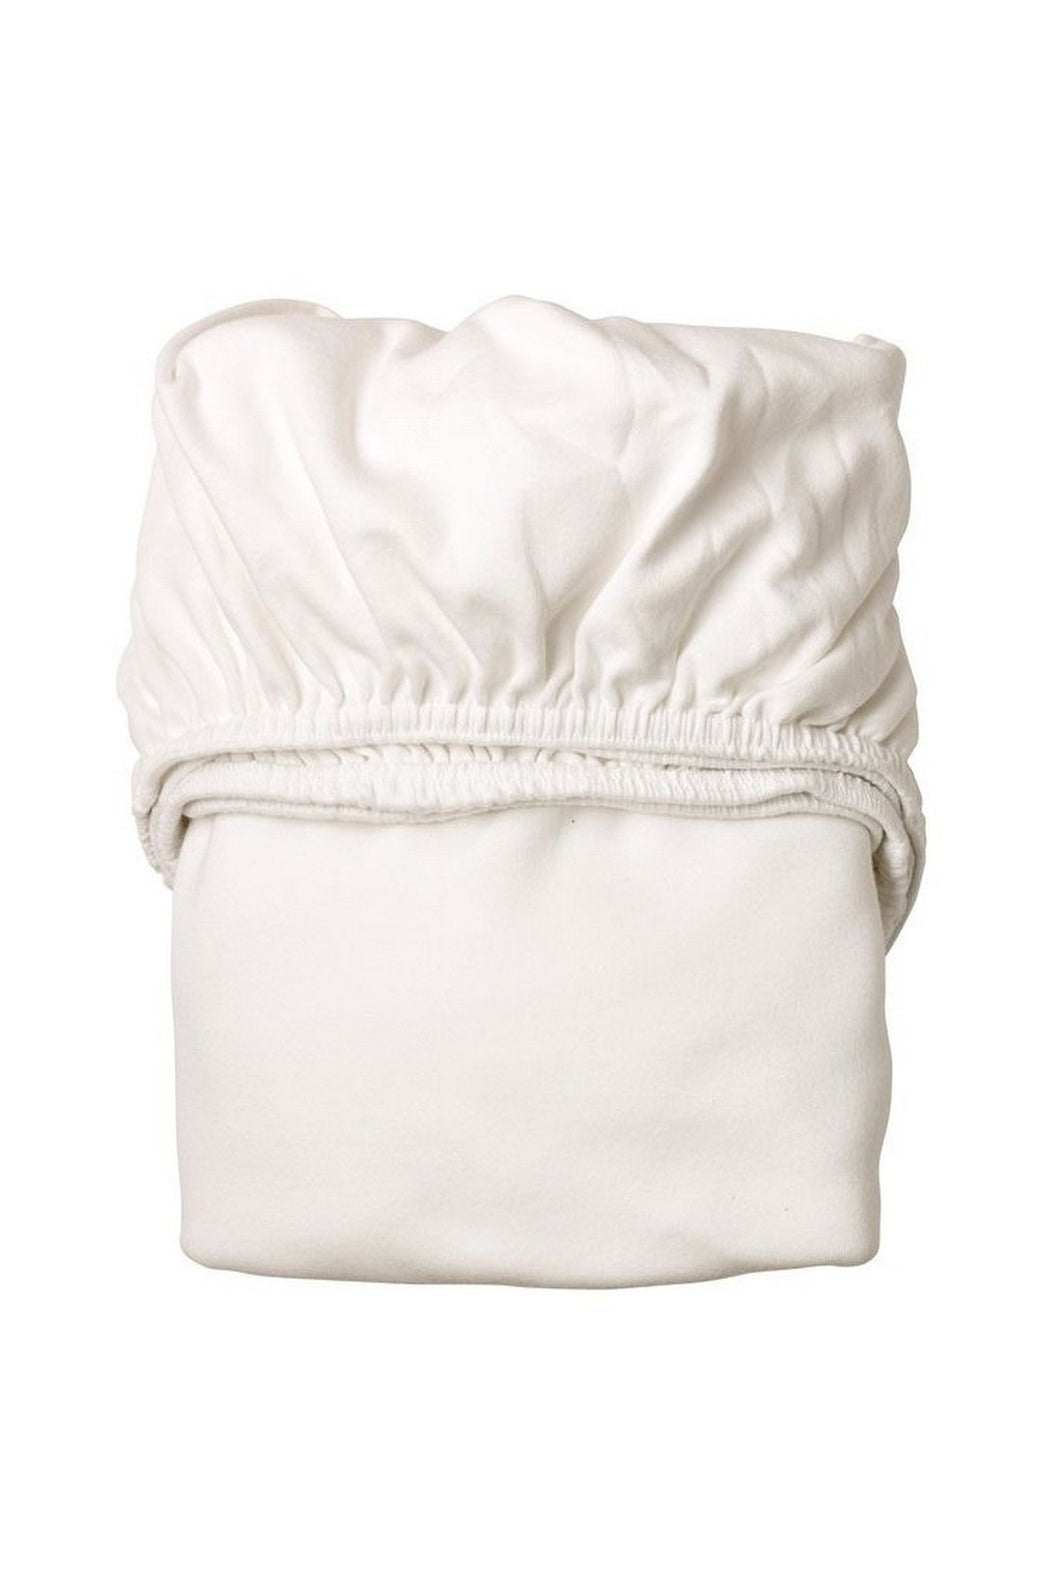 Leander Fitted Sheet For Baby Cot White 1